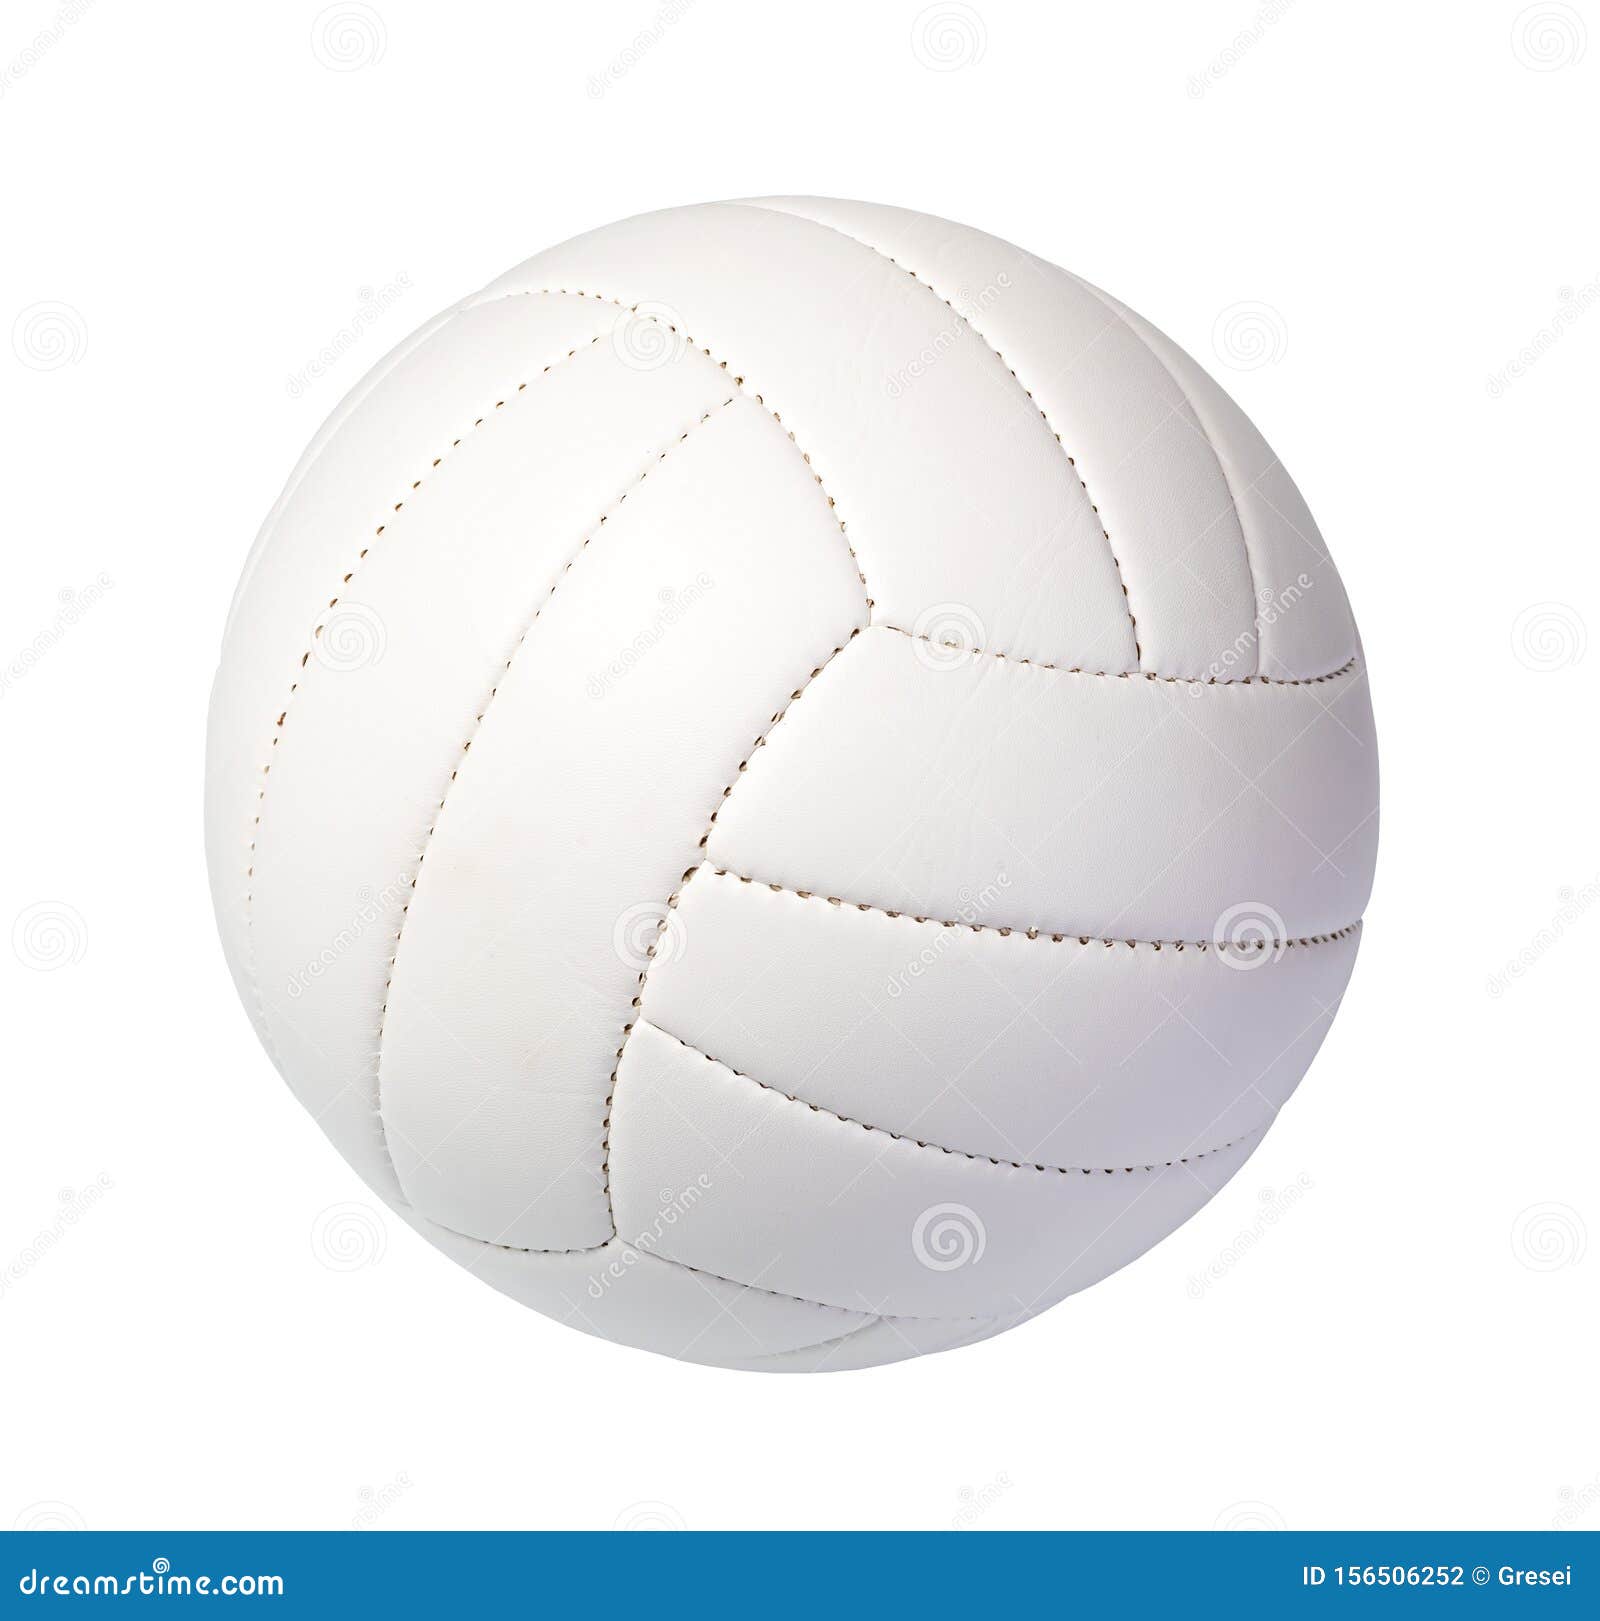 Volleyball Ball stock photo. Image of equipment, recreation - 156506252